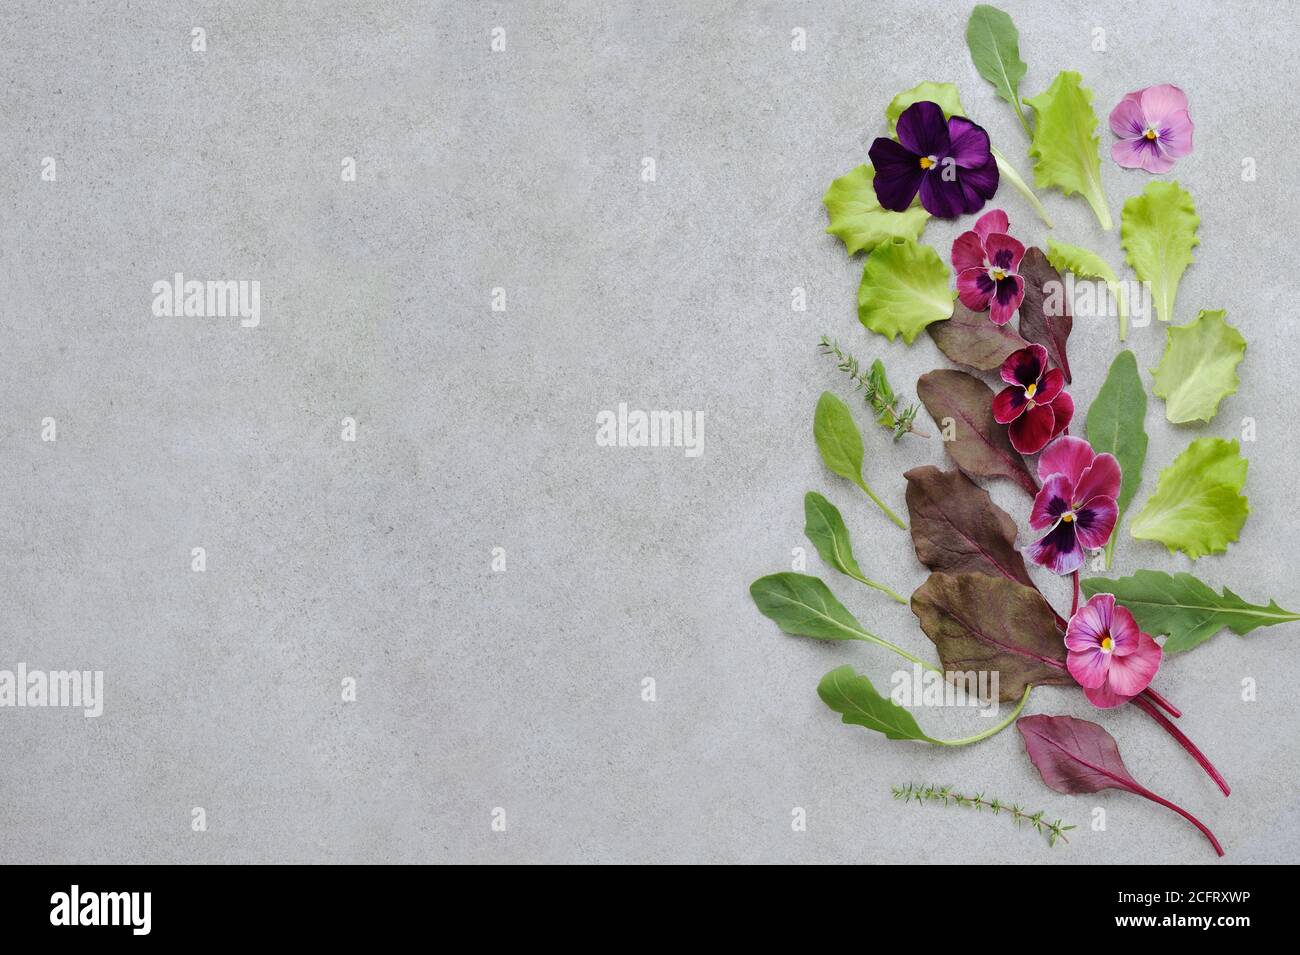 Edible flowers for decorating dishes and lettuce on the gray stone background.Food background. Top view. Stock Photo